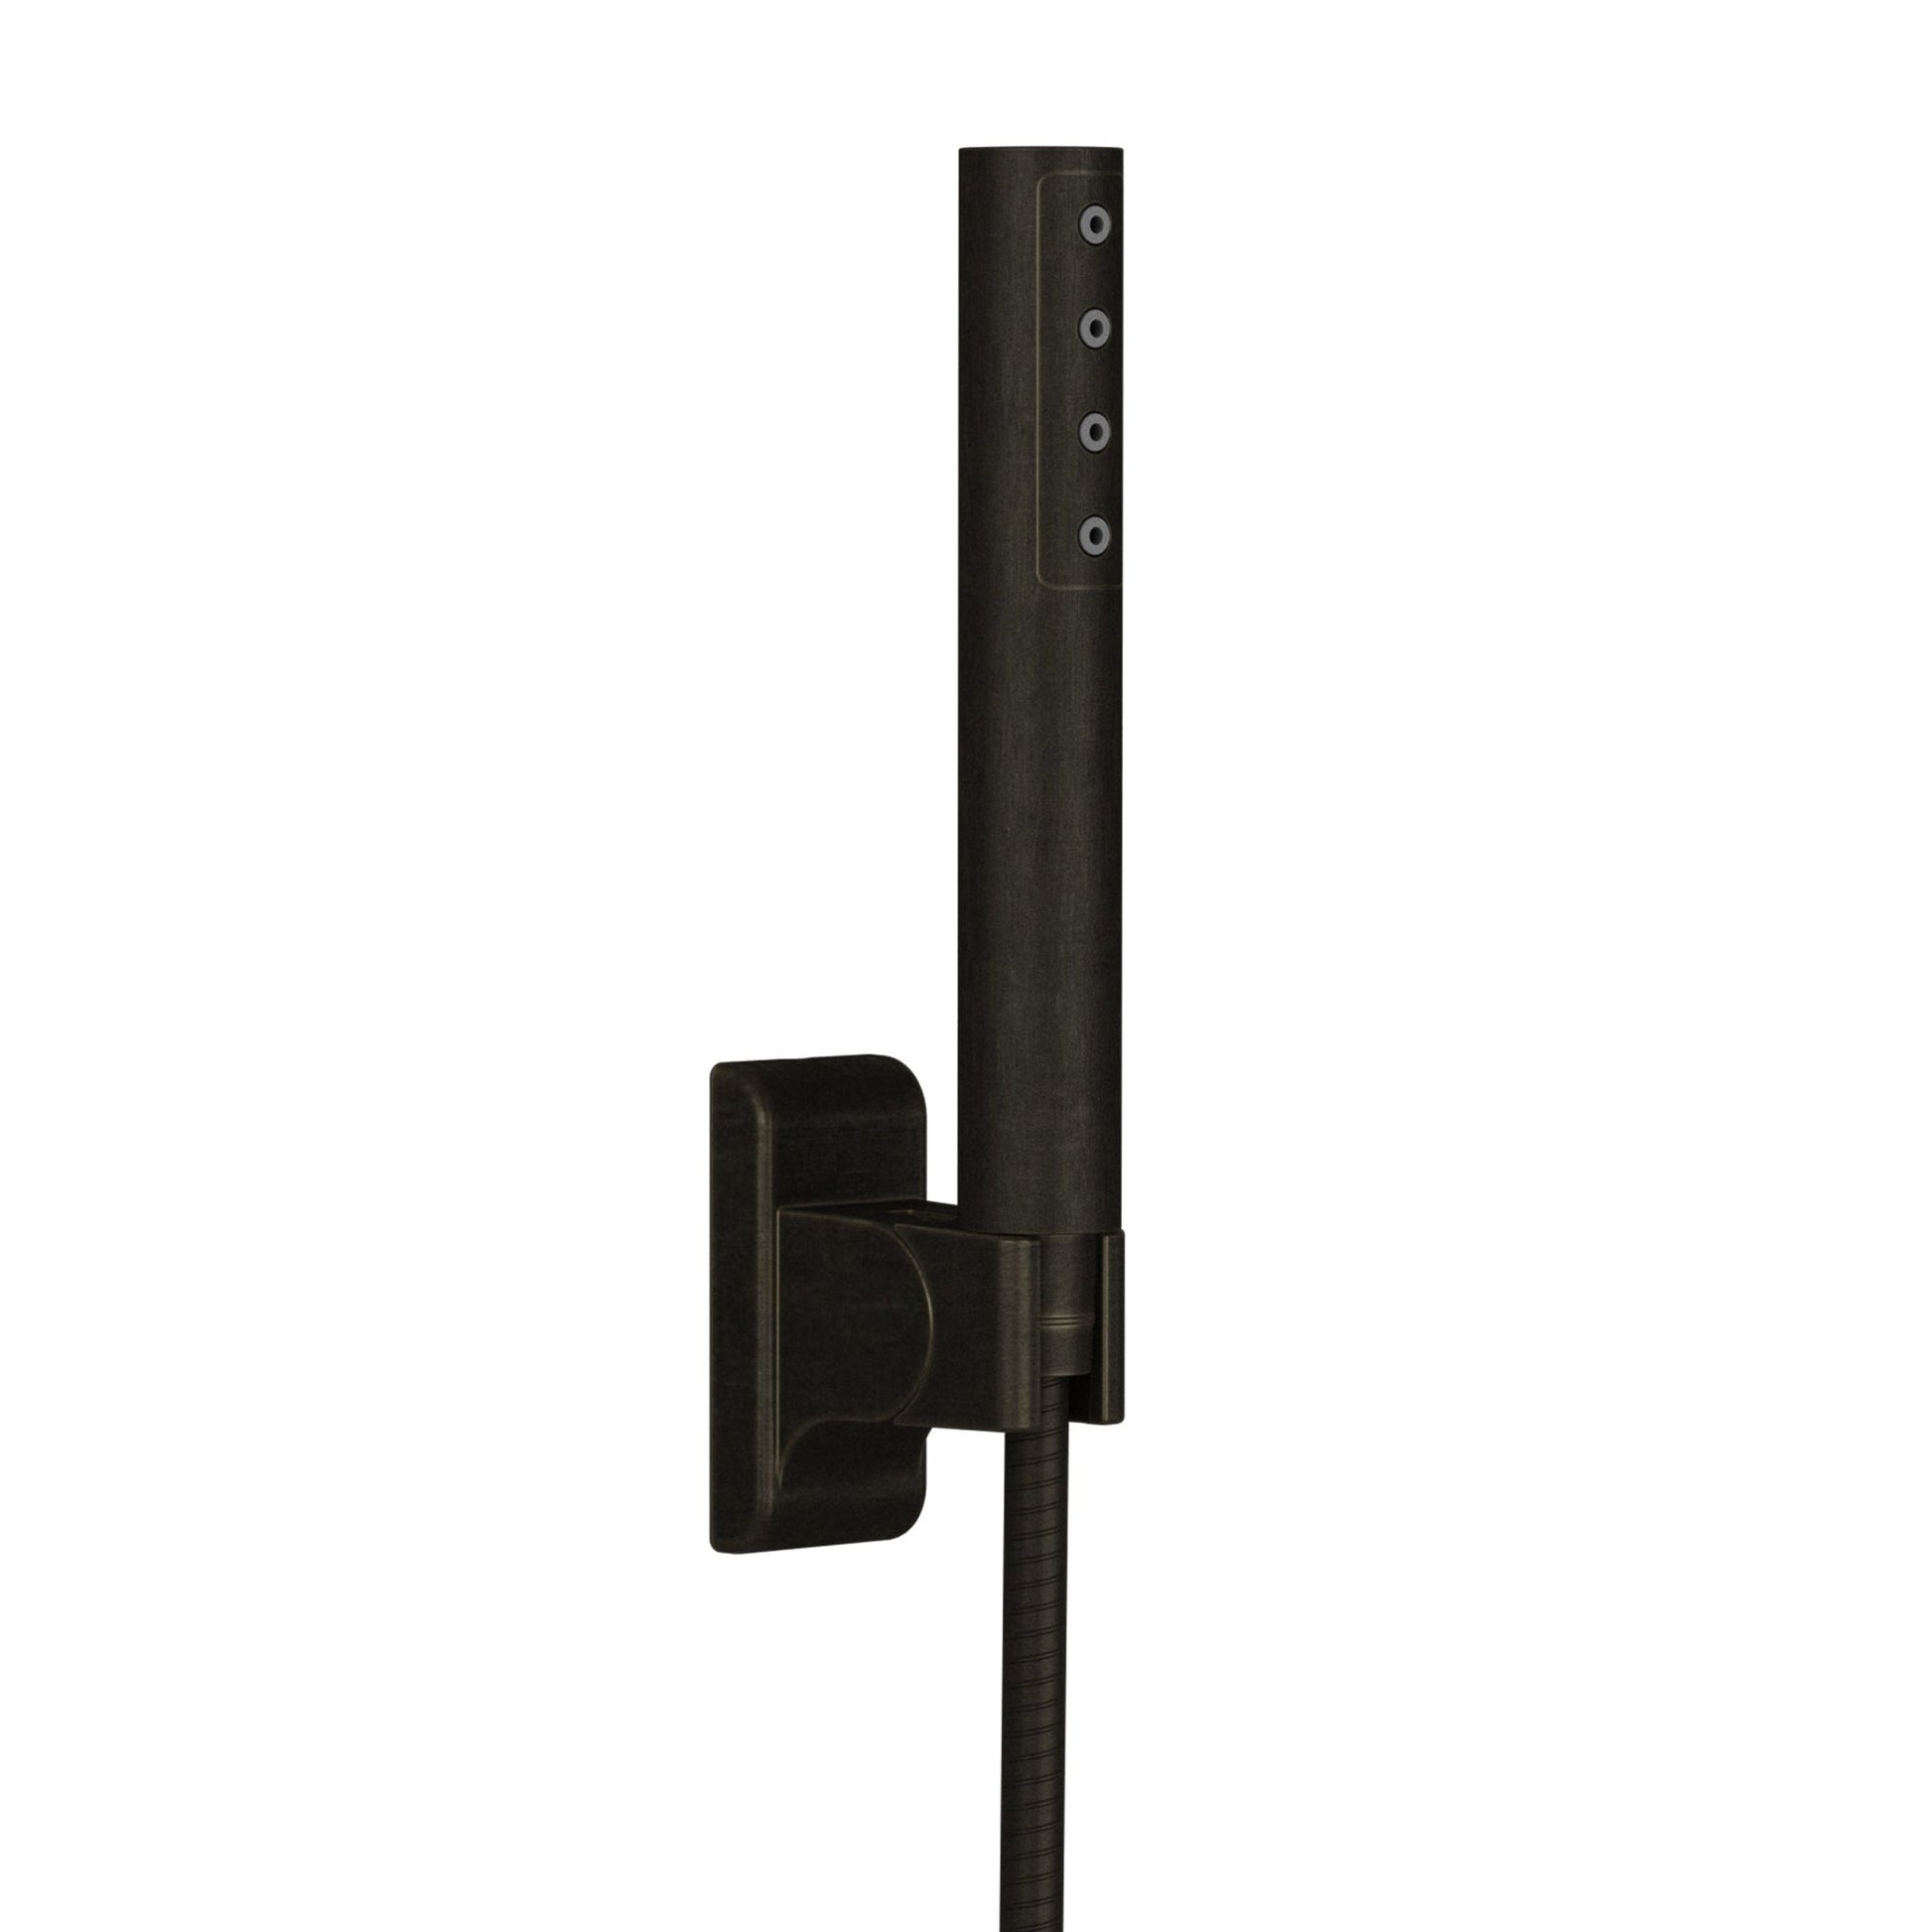 PULSE ShowerSpas Niagra Wall Mounted High Flow Tub Filler in Oil Rubbed Bronze Finish With Single Function Hand Shower